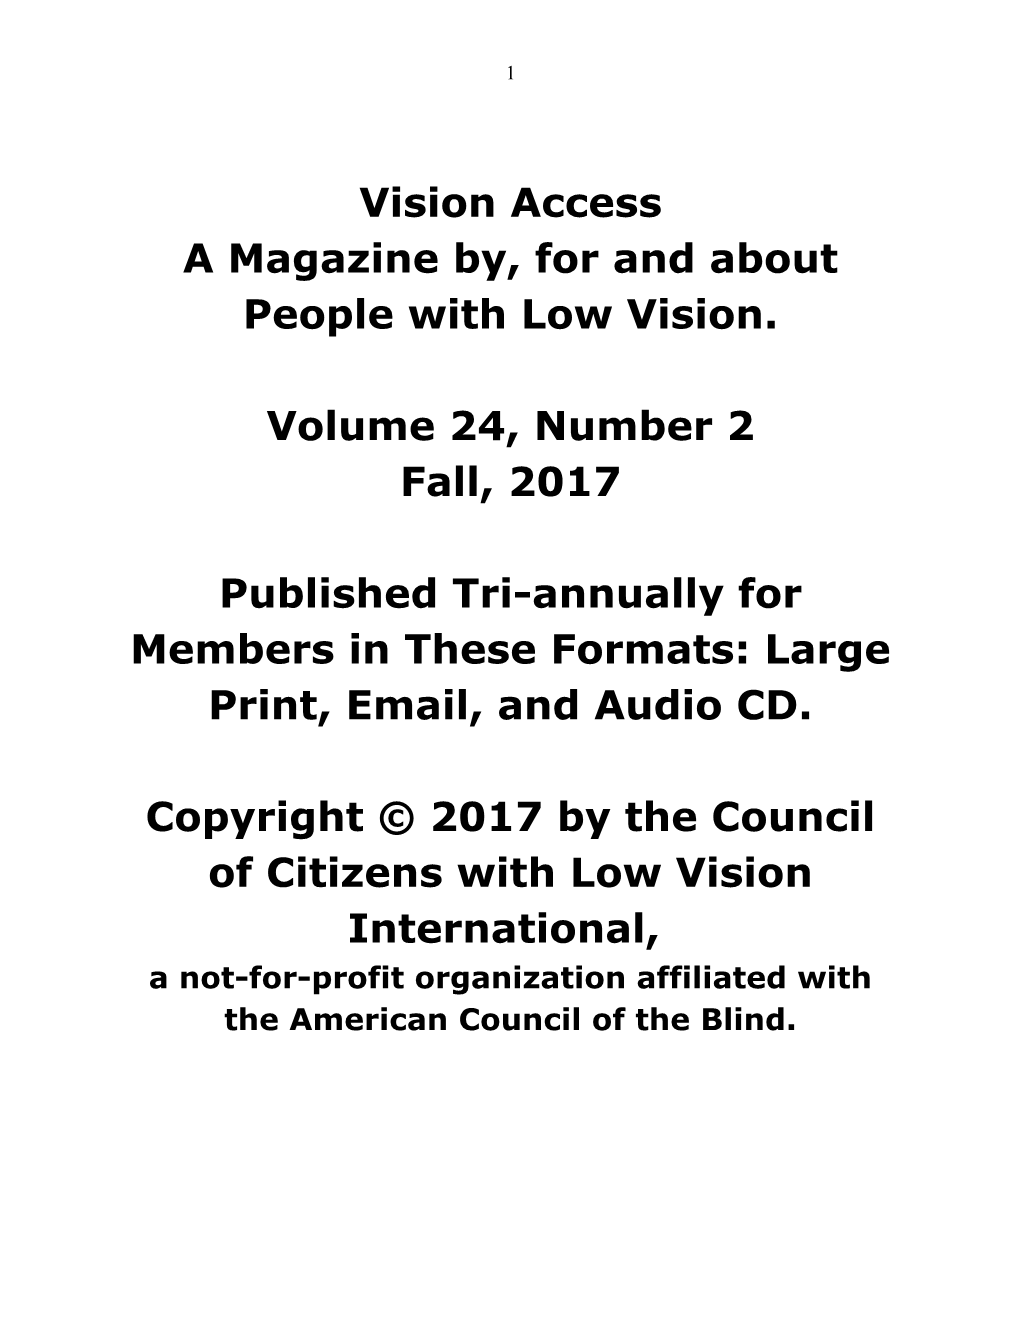 A Magazine By, for and About People with Low Vision